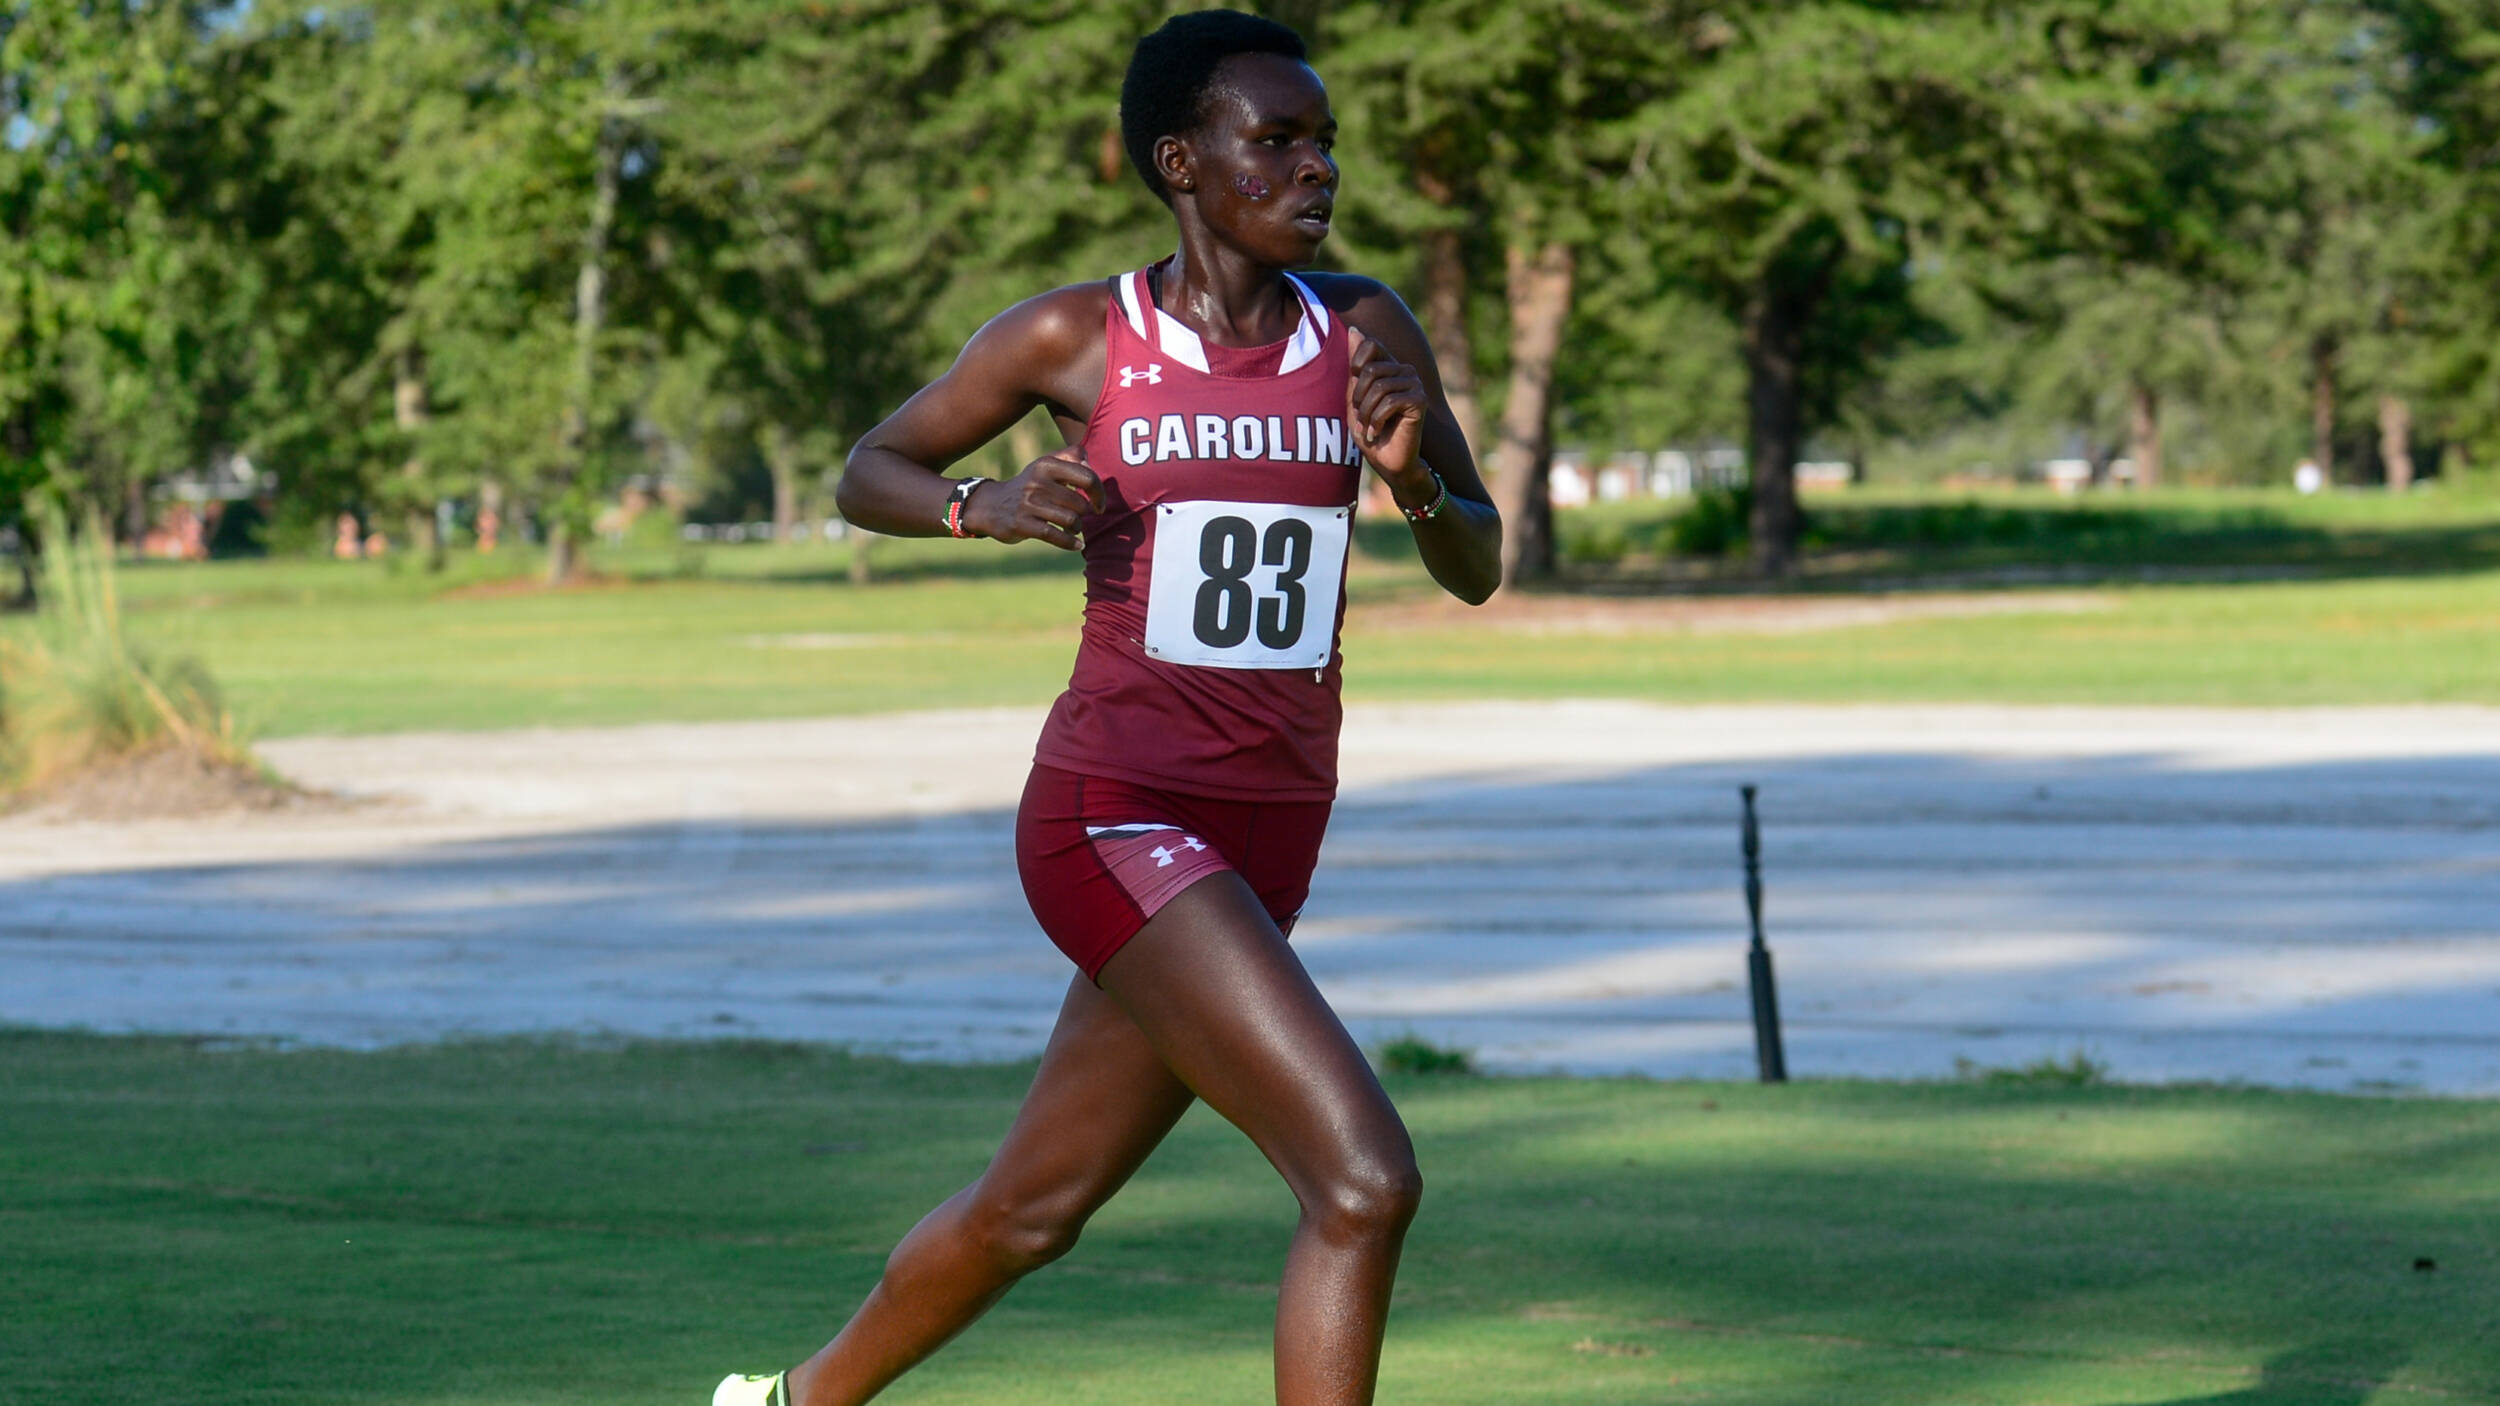 Kosgei Earns League and National Recognition as Runner of the Week